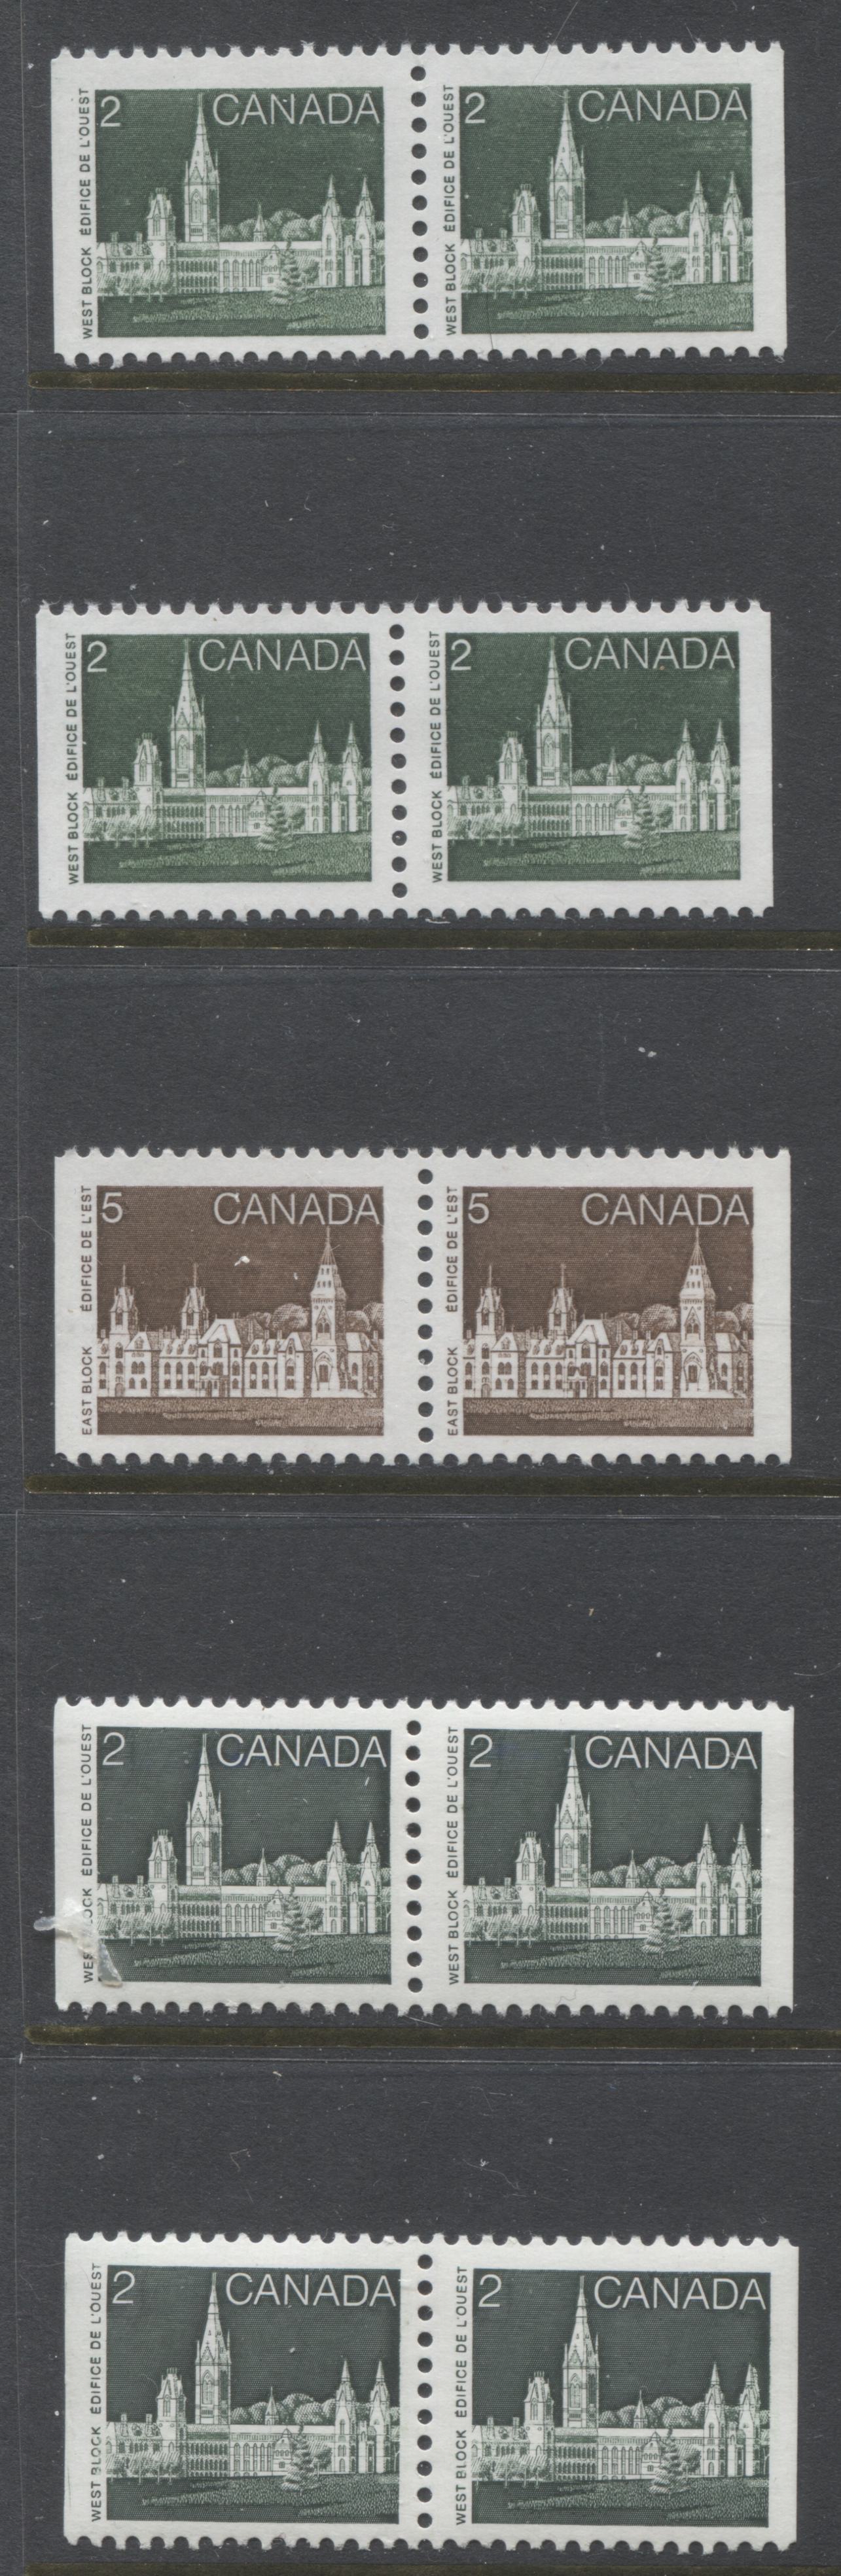 Canada #939i. 939a, 939ai, 941i 2c, 5c Deep Green & Deep Brown Parliament Buildings, 1982-1987 Artifacts & National Parks Issue, 5 VFNH Booklet Pairs, NF/NF to LF/LF, Rolland & Harrison Papers